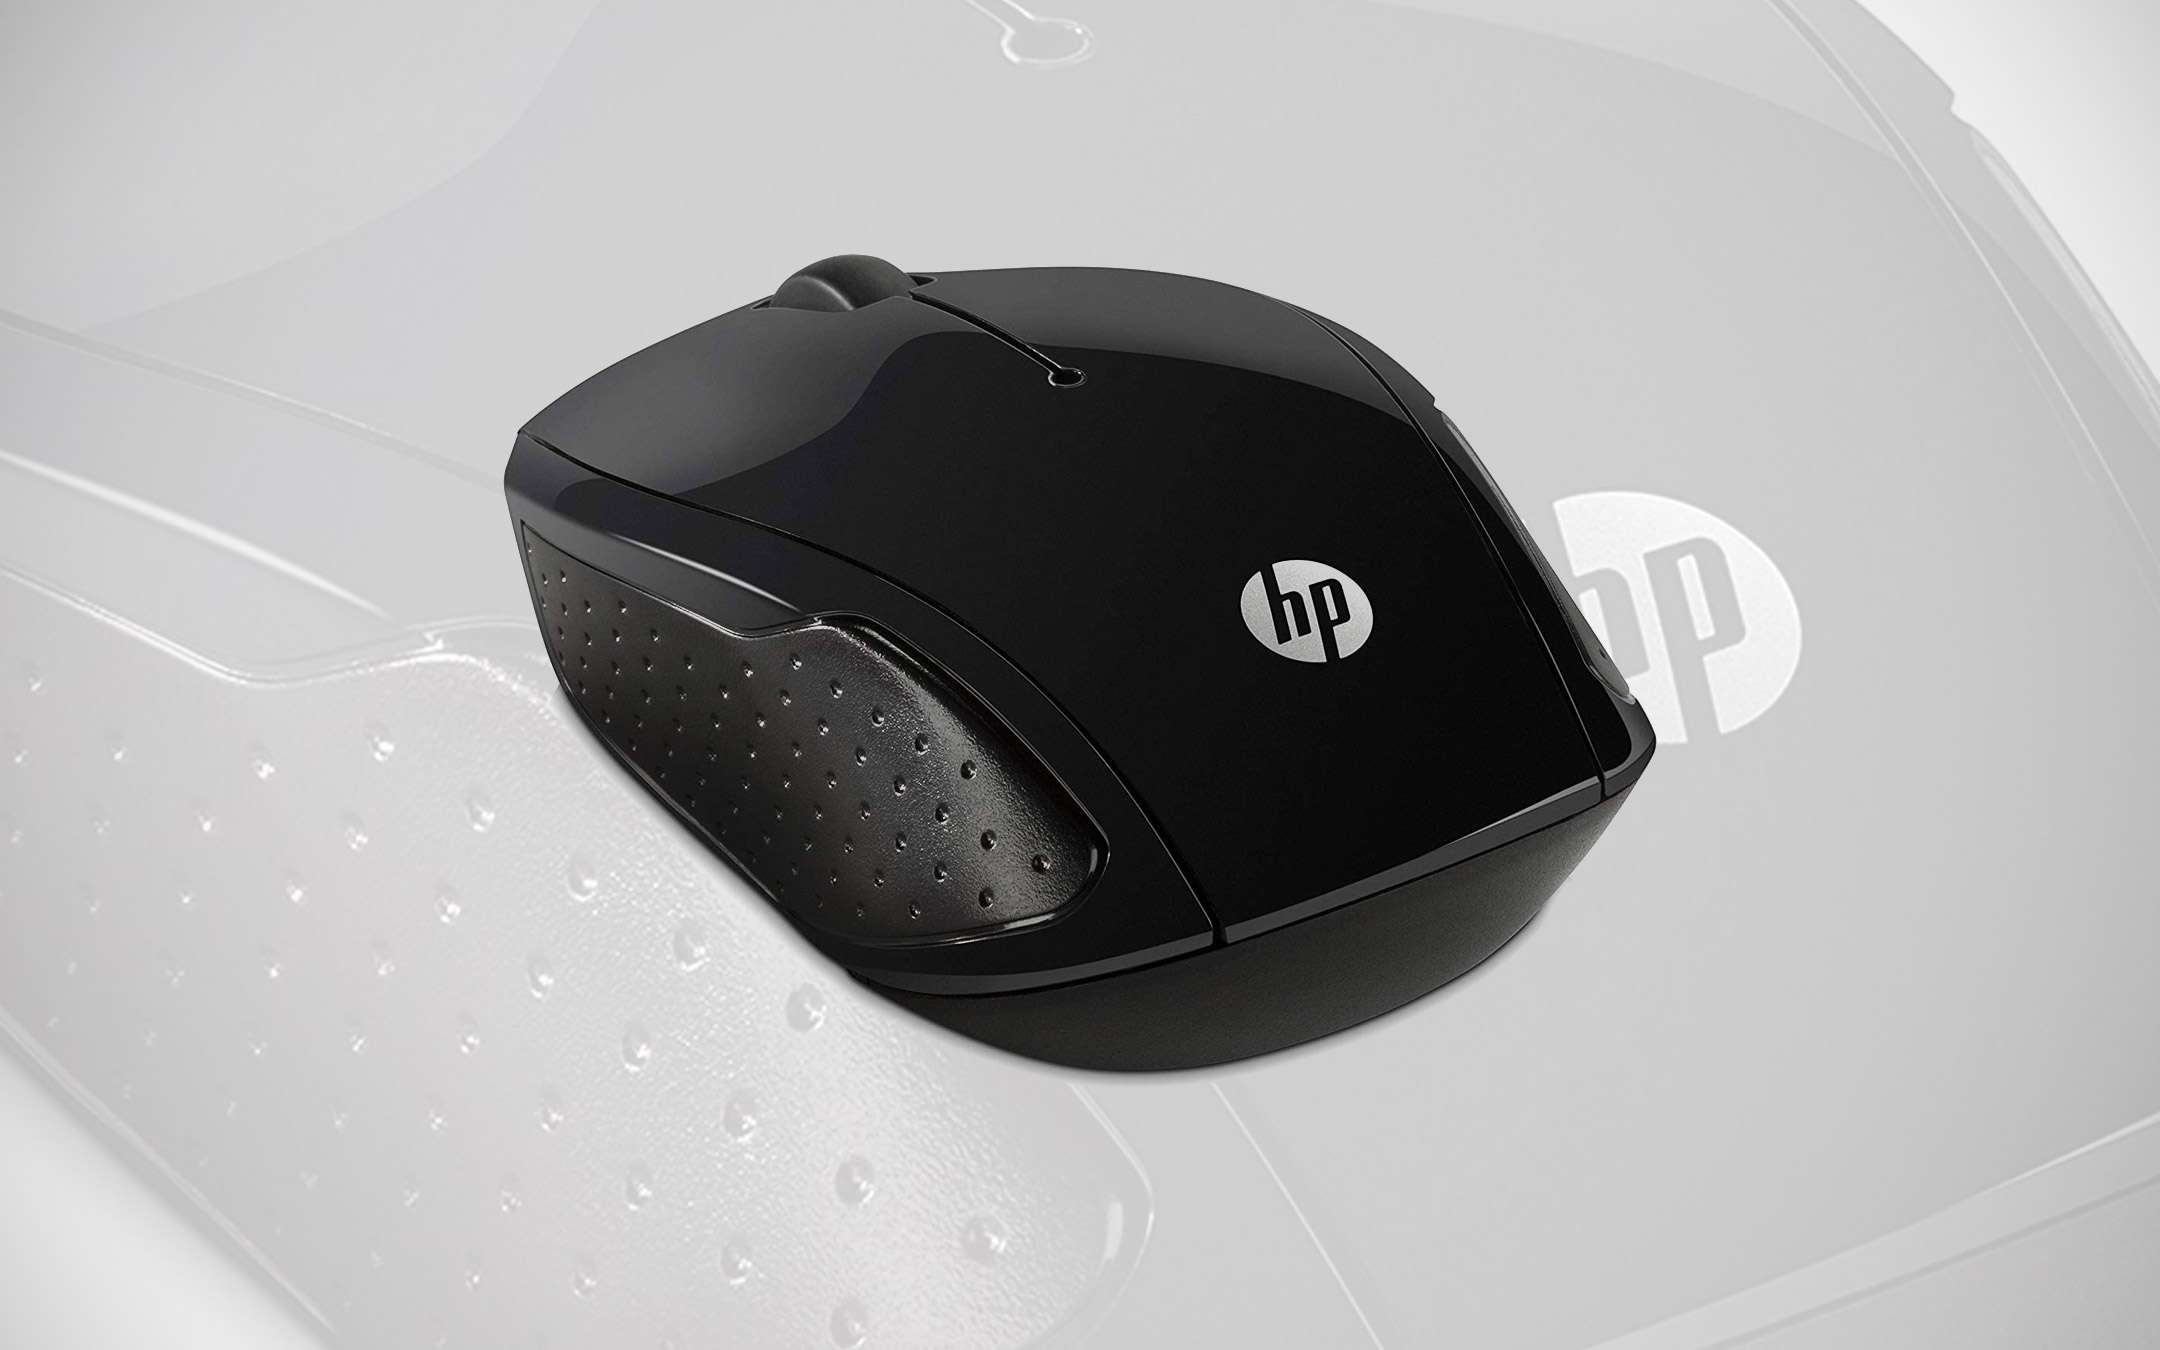 Only 9 euros for the HP 200 wireless mouse